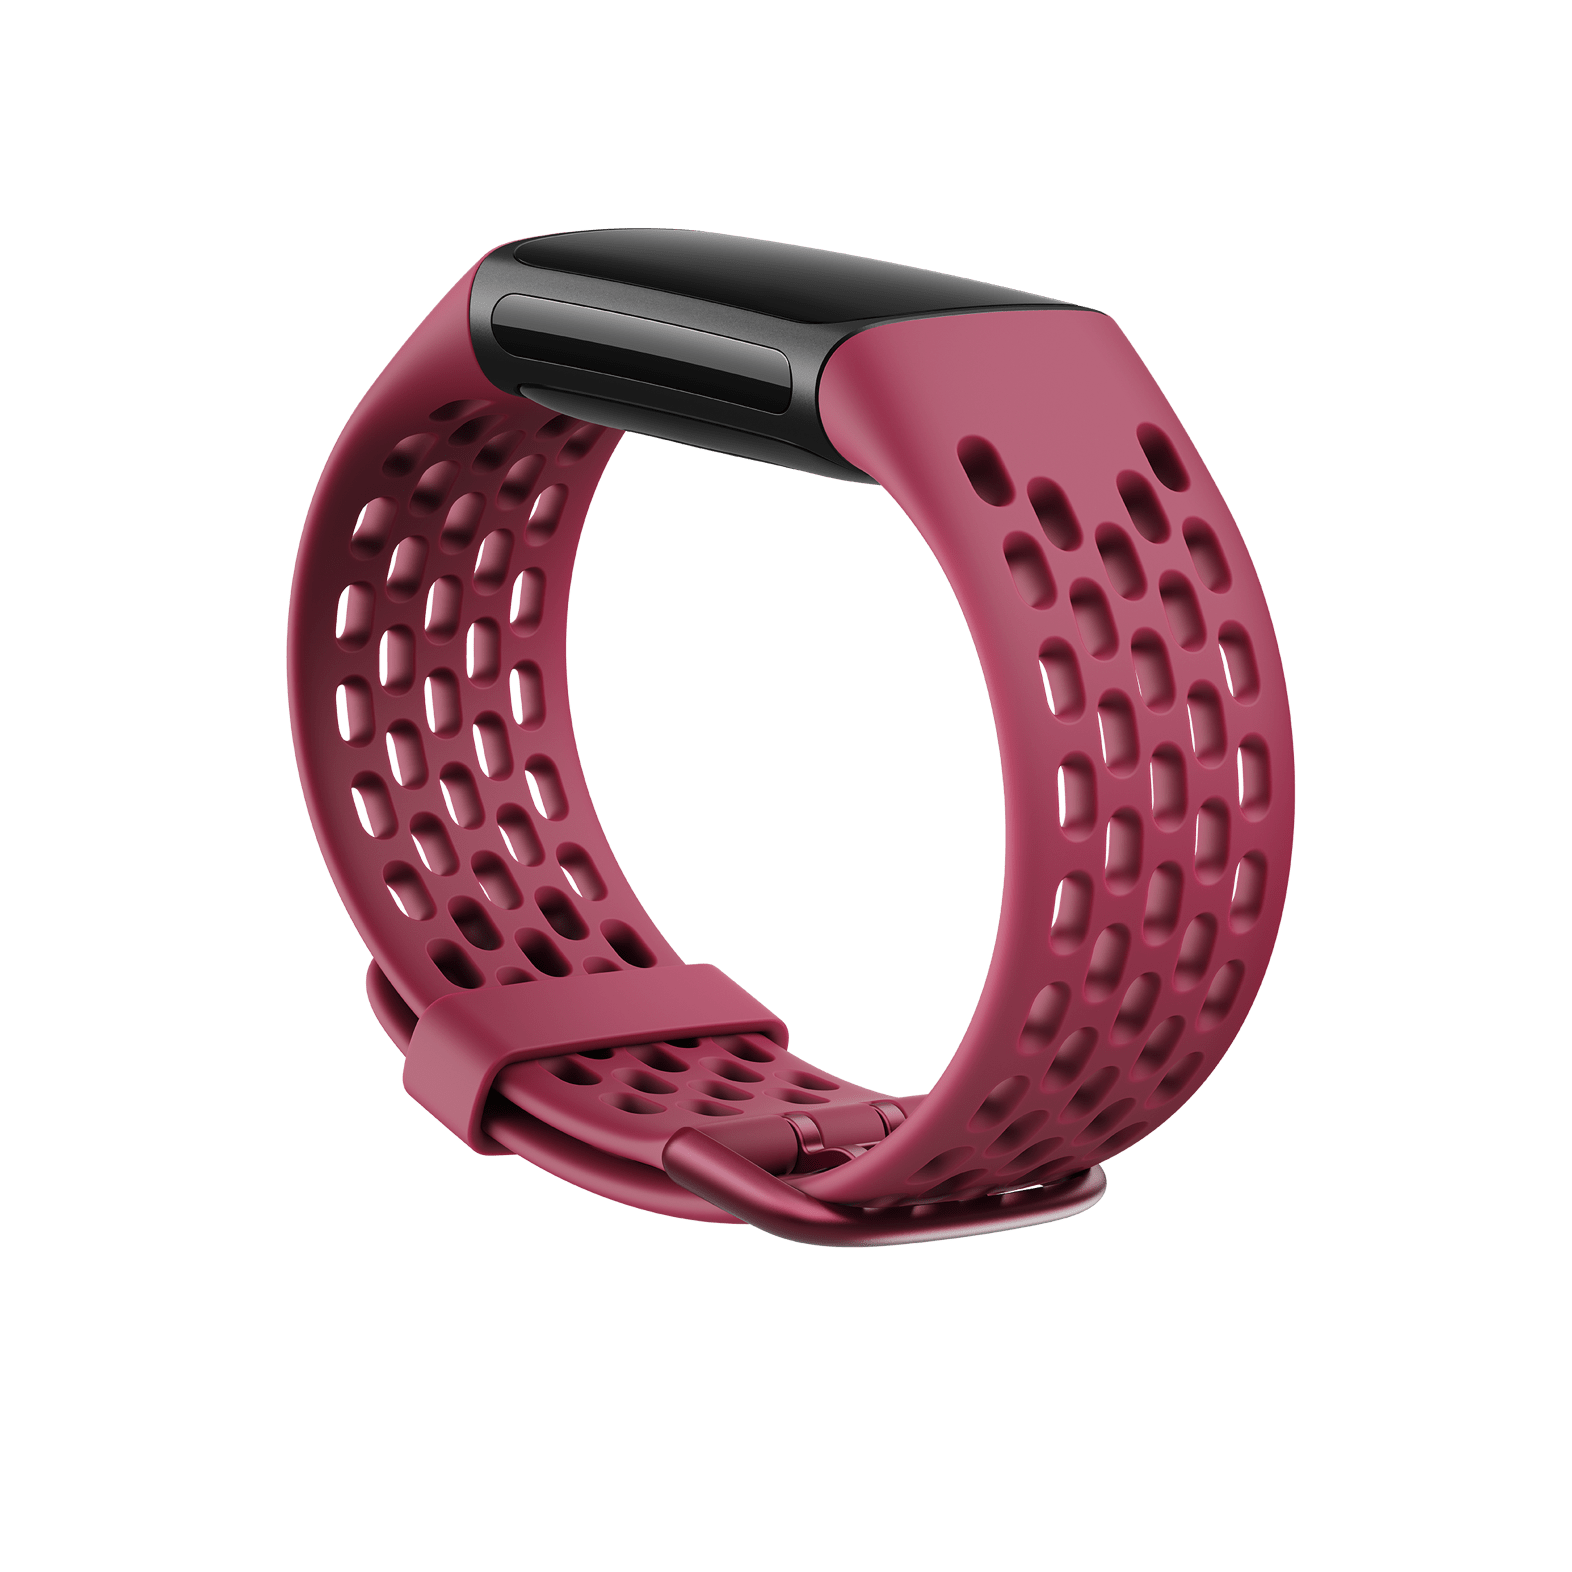 Replacement Buckle Set for Activity Tracker Band on Fitbit Charge HR Band Newest 